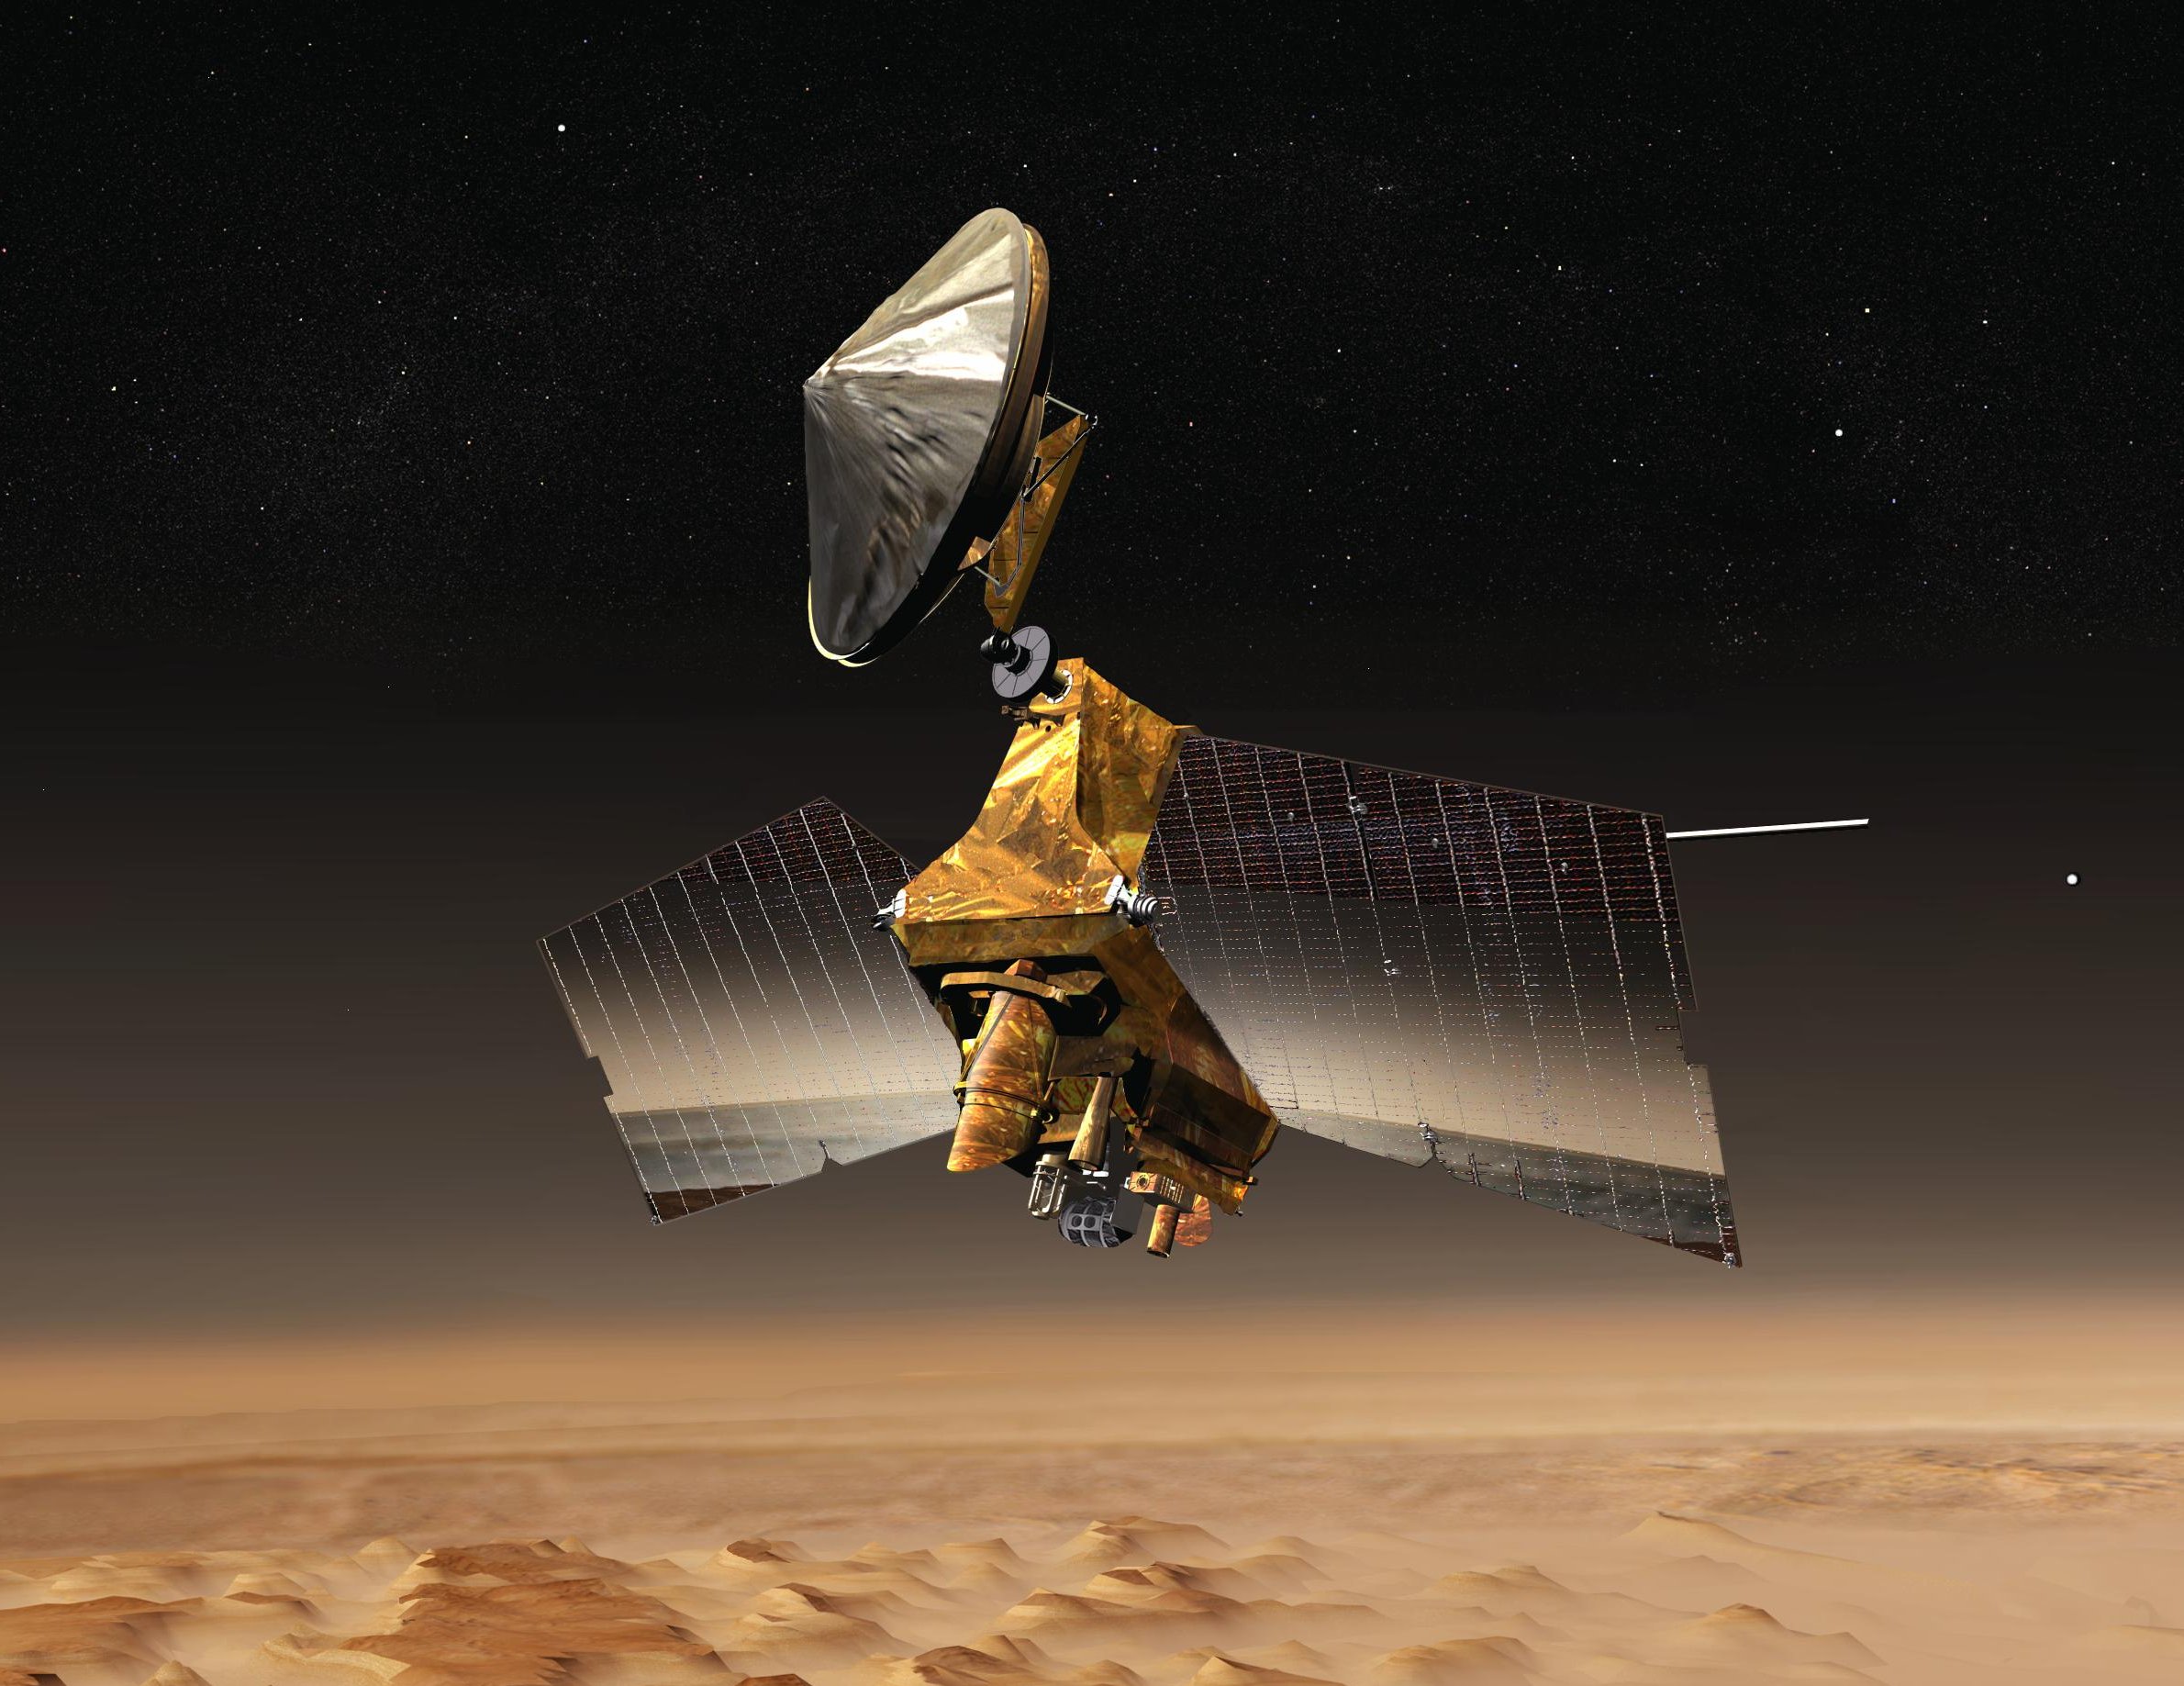 Illustration of NASA’s Mars Reconnaissance Orbiter shows the spacecraft in orbit above Mars, pointing its cameras down toward the surface. Parts of Mars and its atmosphere are reflected in the vehicle’s two large solar panels, which extend to either side. The top of the spacecraft features a large communications antenna, pointed to the left.